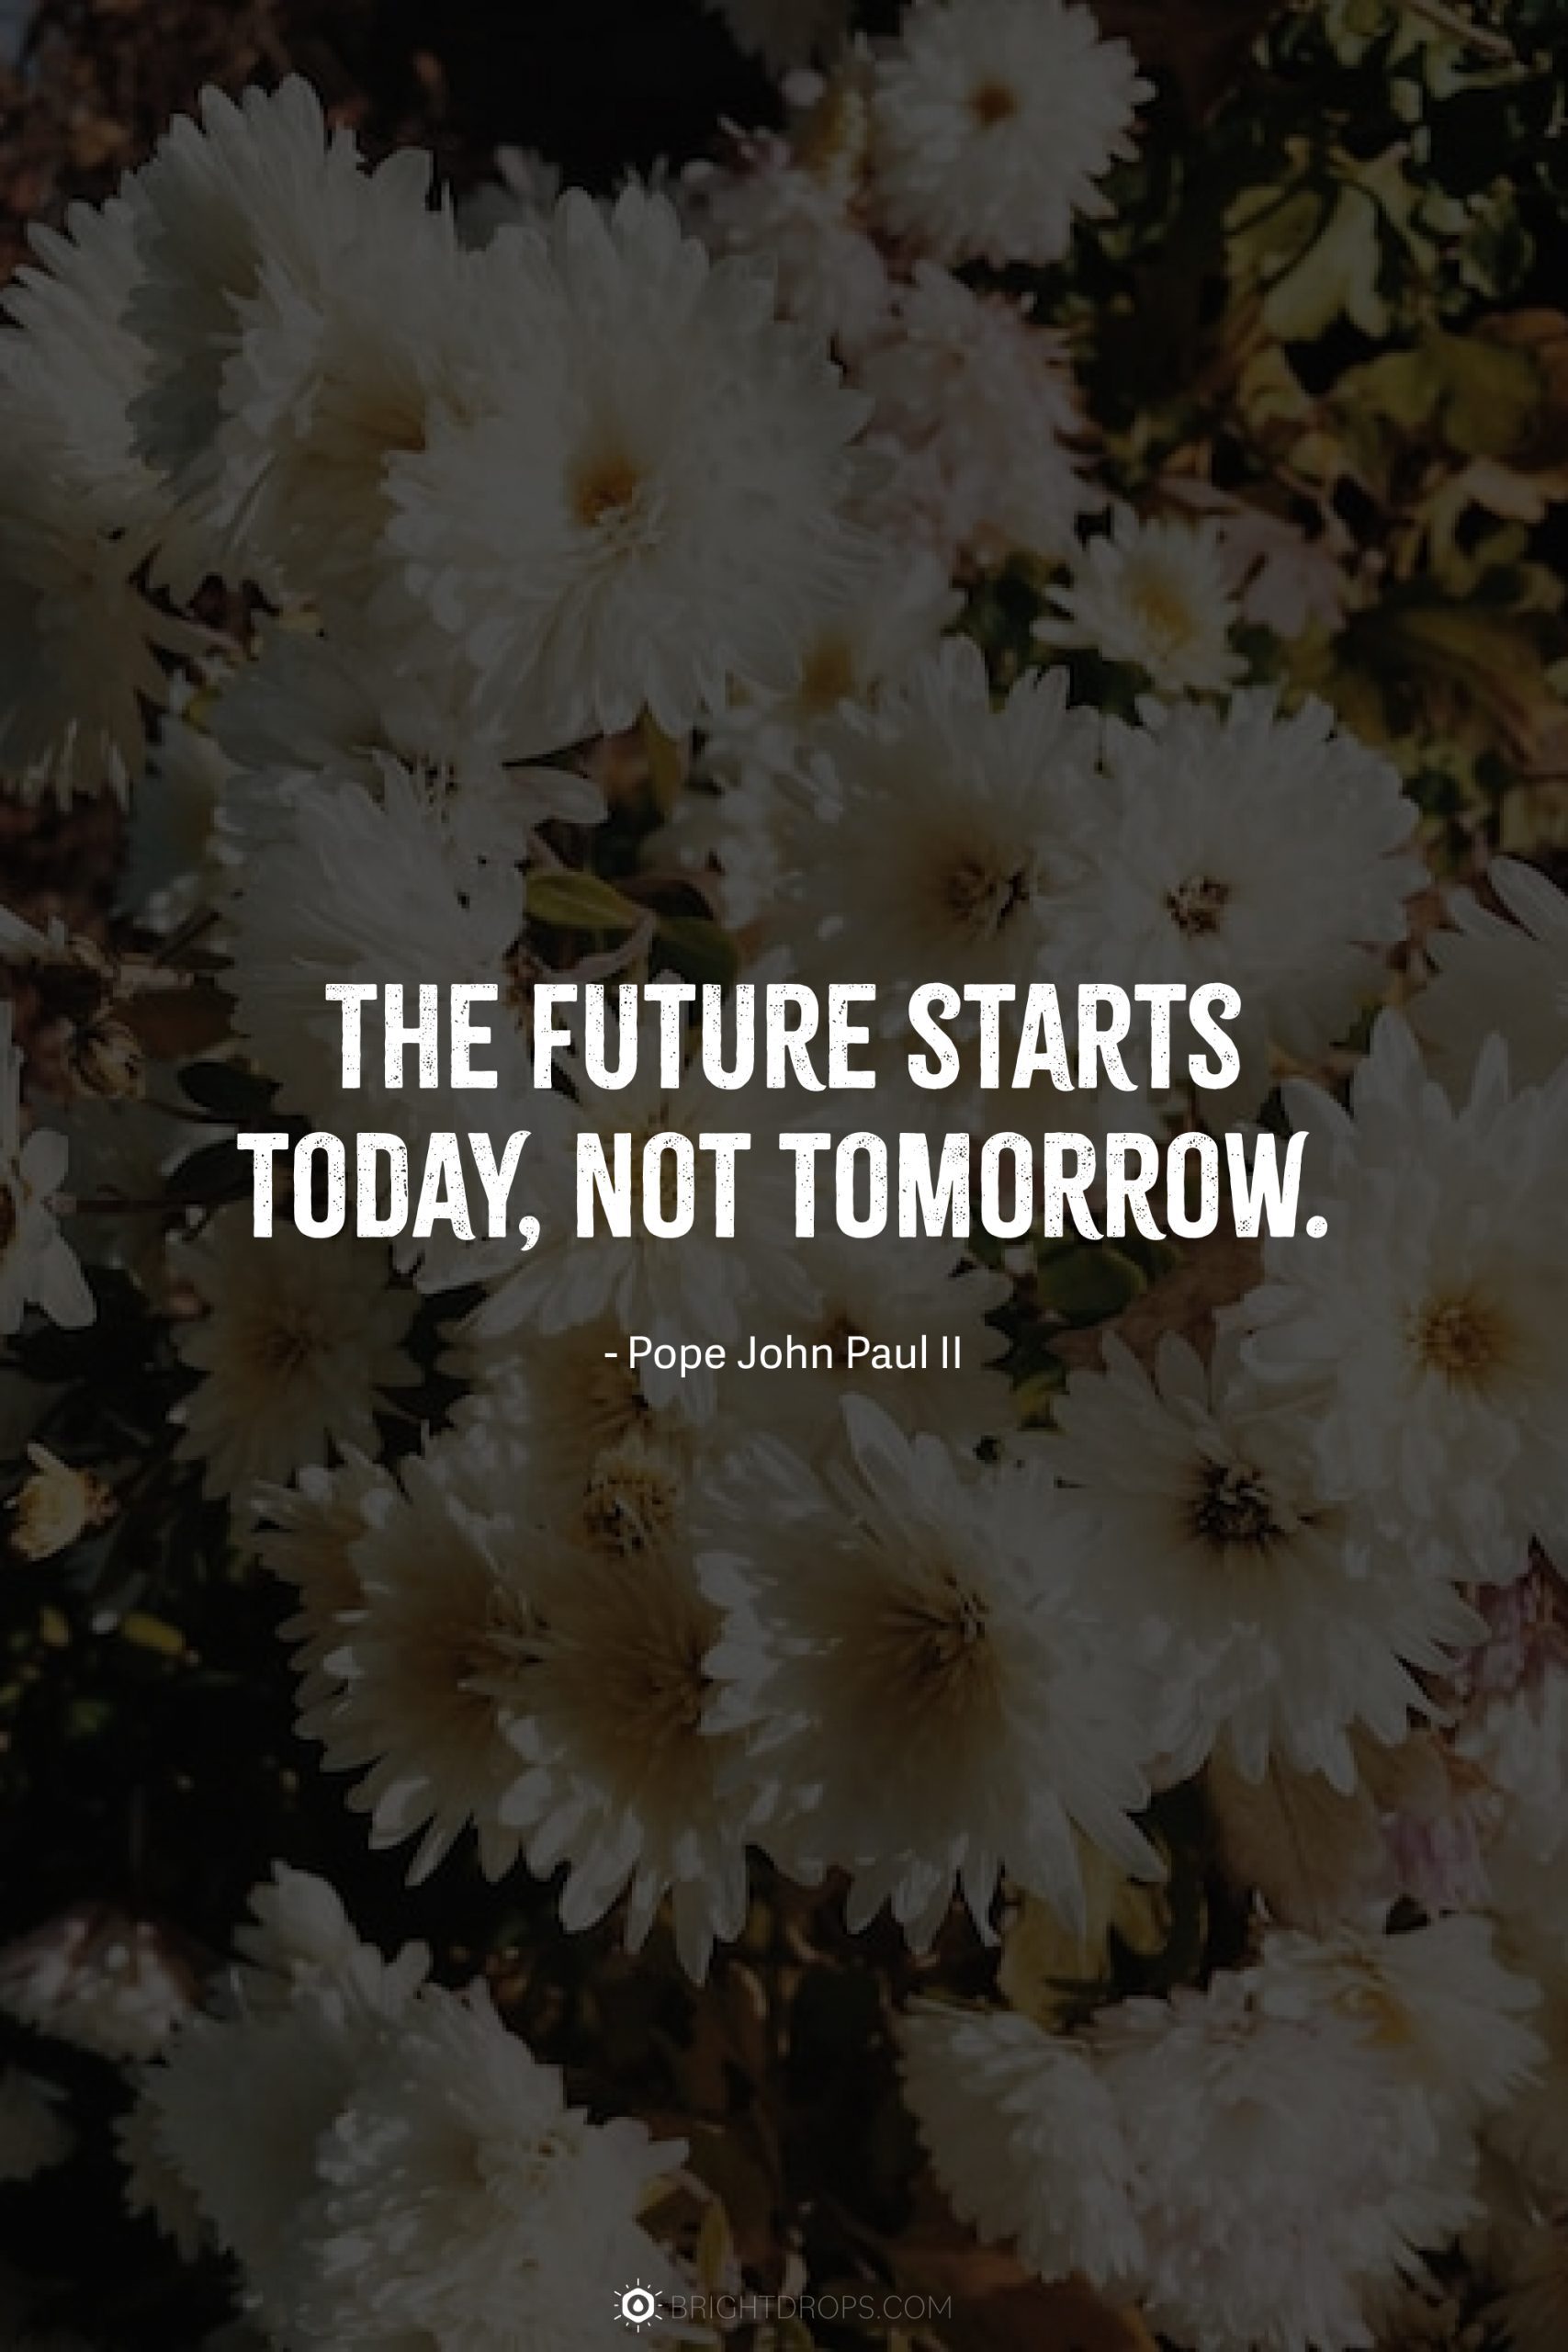 The future starts today, not tomorrow.